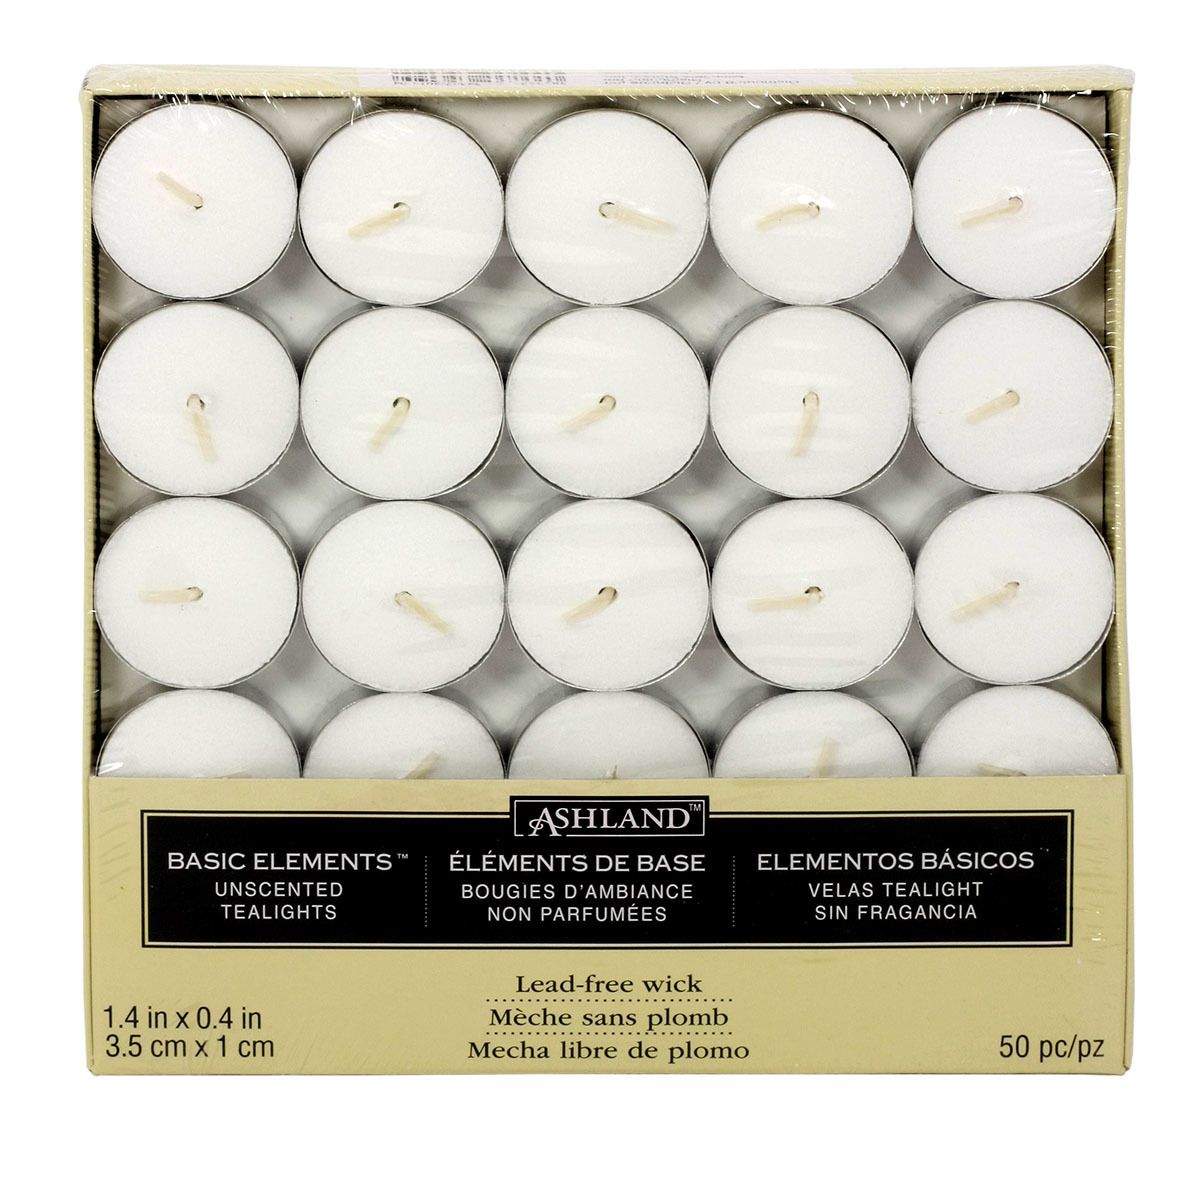 A package of small white candles. 